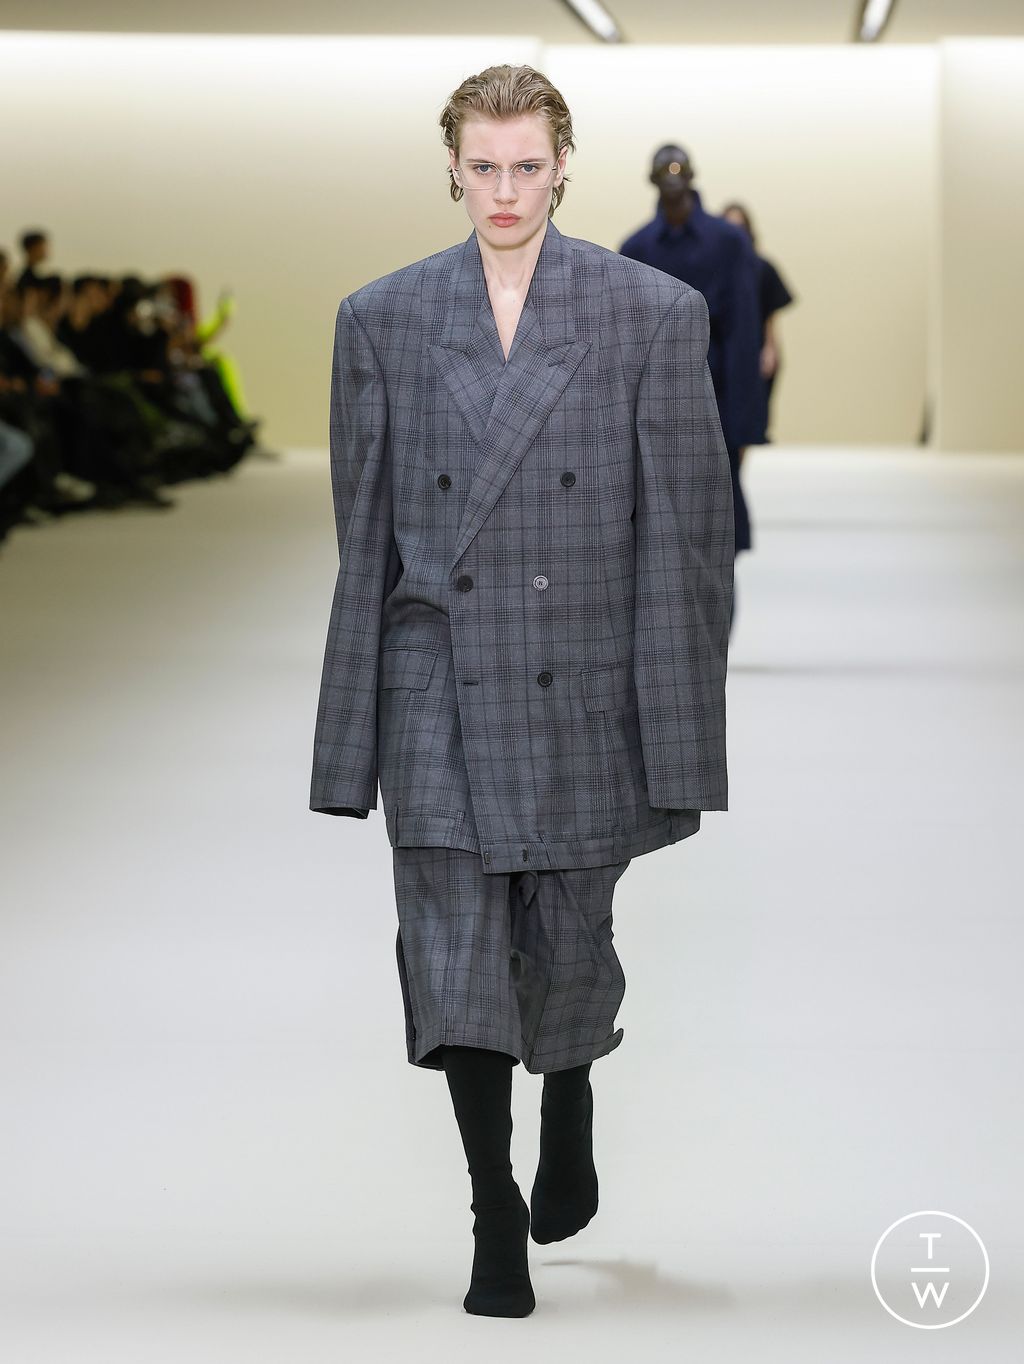 Balenciaga Got Down and Dirty with Spring/Summer 2023 Collection